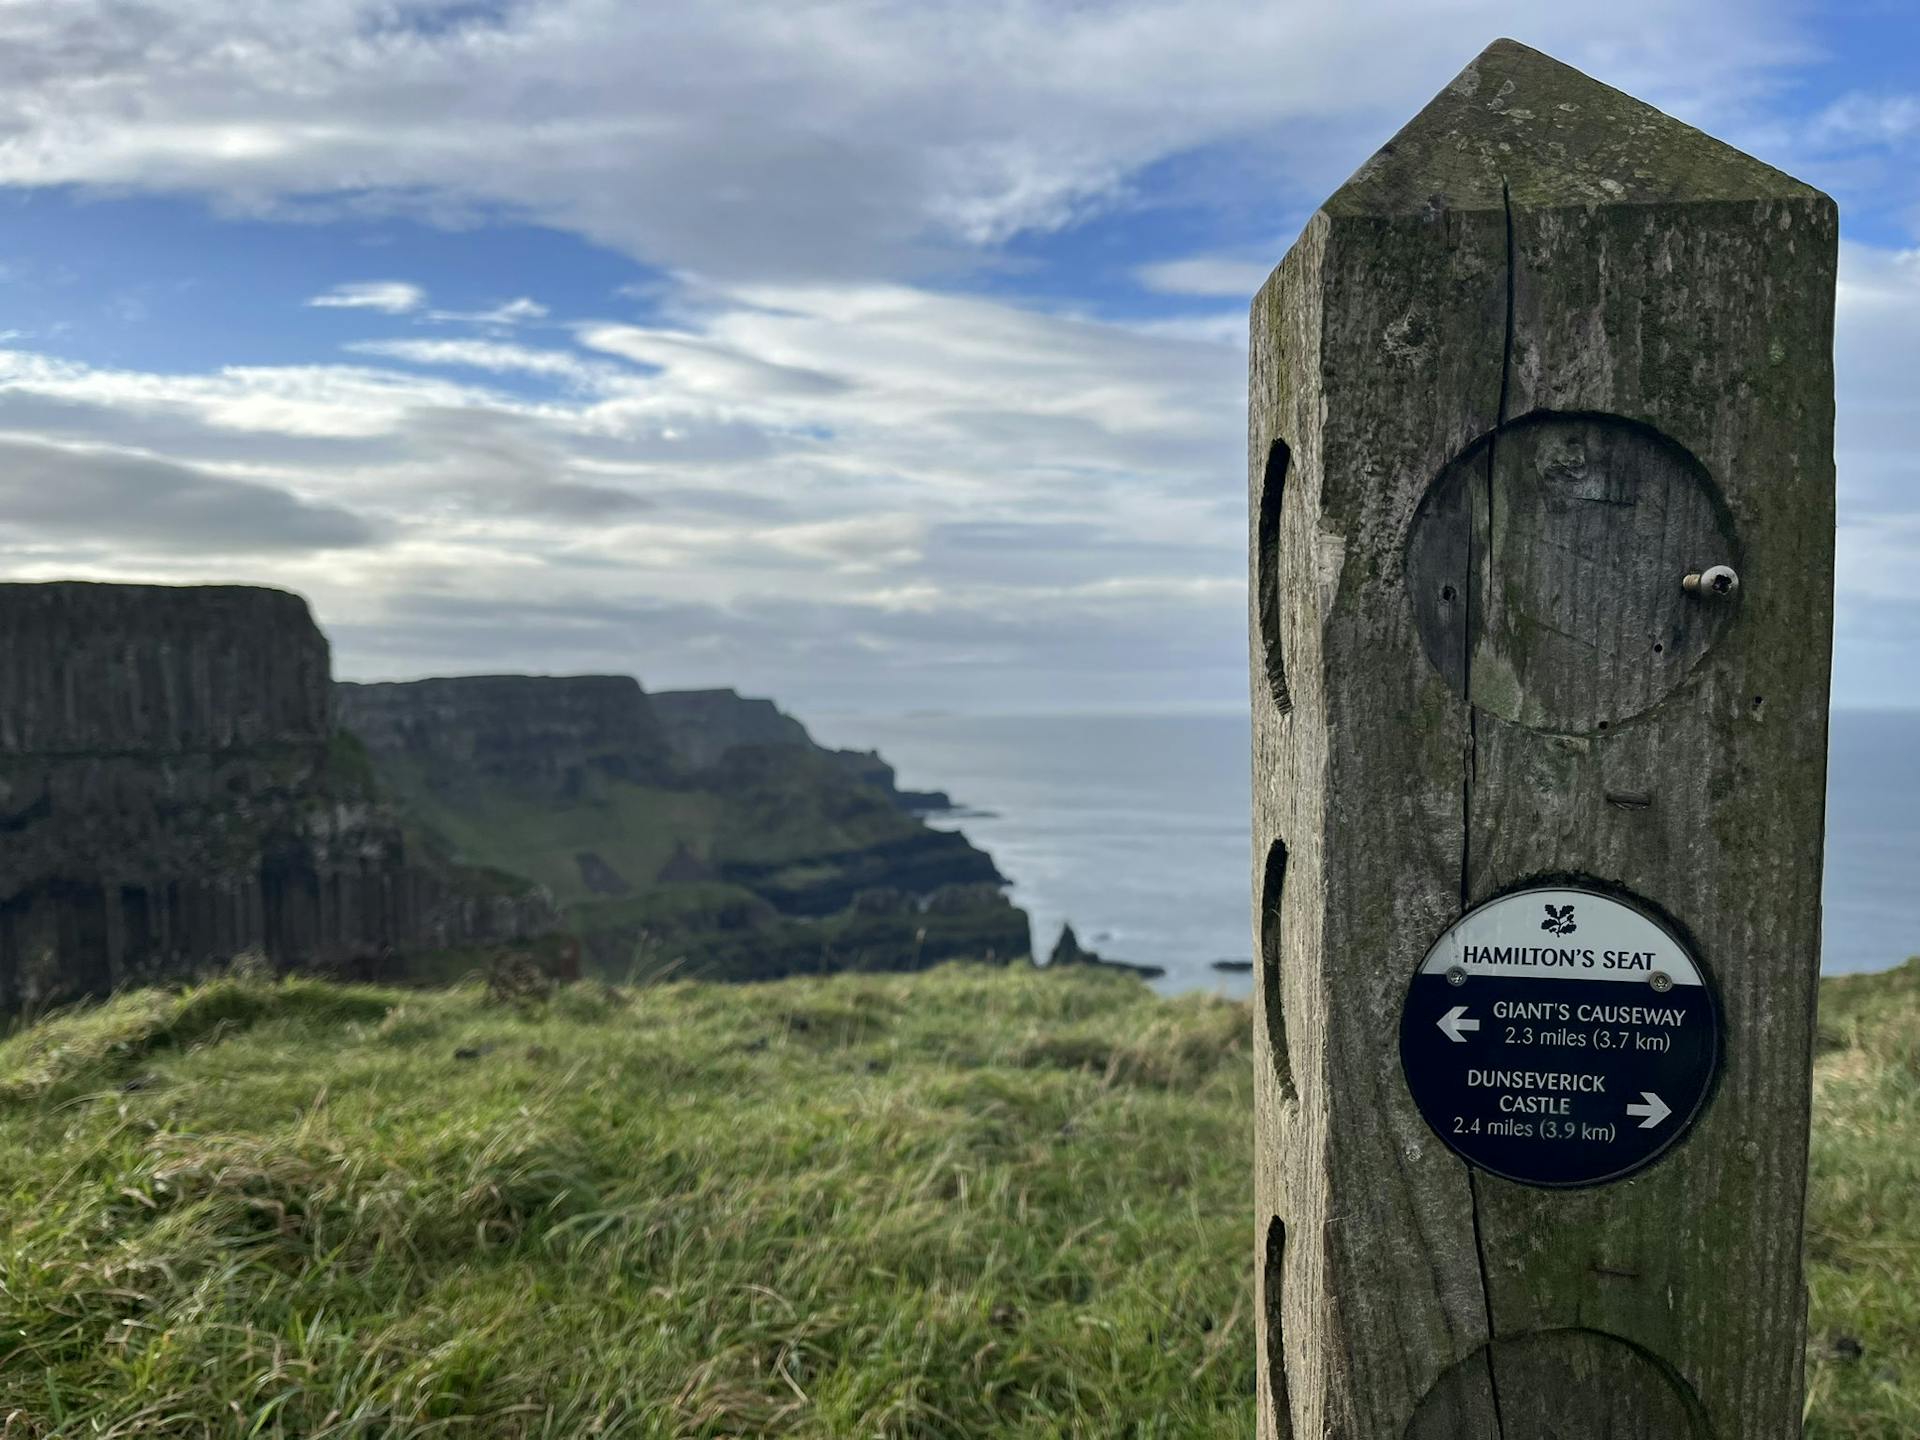 <p>Hamilton’s Seat is a viewpoint on the upper cliff path of the Giant’s Causeway, where you can see the spectacular coastline and the basalt columns from a different perspective. It is named after William Hamilton, a geologist who studied the causeway in the 18th century. </p><p><br></p><p>Hamilton’s Seat is located near Port na Tober, a small bay with a natural arch and a waterfall. It is one of the highlights of the red trail, which is a 4.5 km circular walk that follows the entire causeway coastline. </p><p><br></p><p>You can reach Hamilton’s Seat by walking from the visitor centre or taking the minibus to the causeway and then following the signs for the red trail. Hamilton’s Seat is a great place to enjoy the scenery and learn more about the geology and history of the Giant’s Causeway.</p>